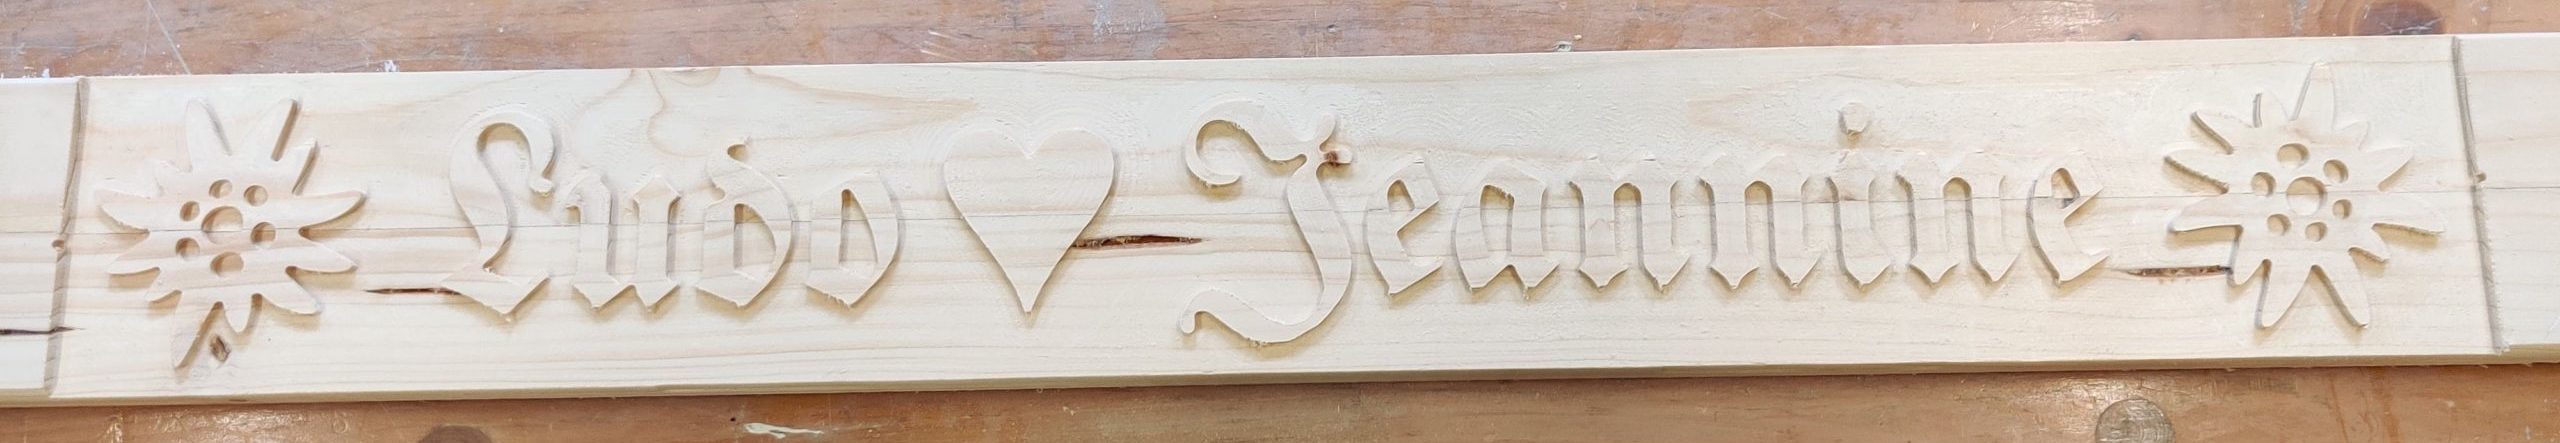 Wood engraved with the CNC router